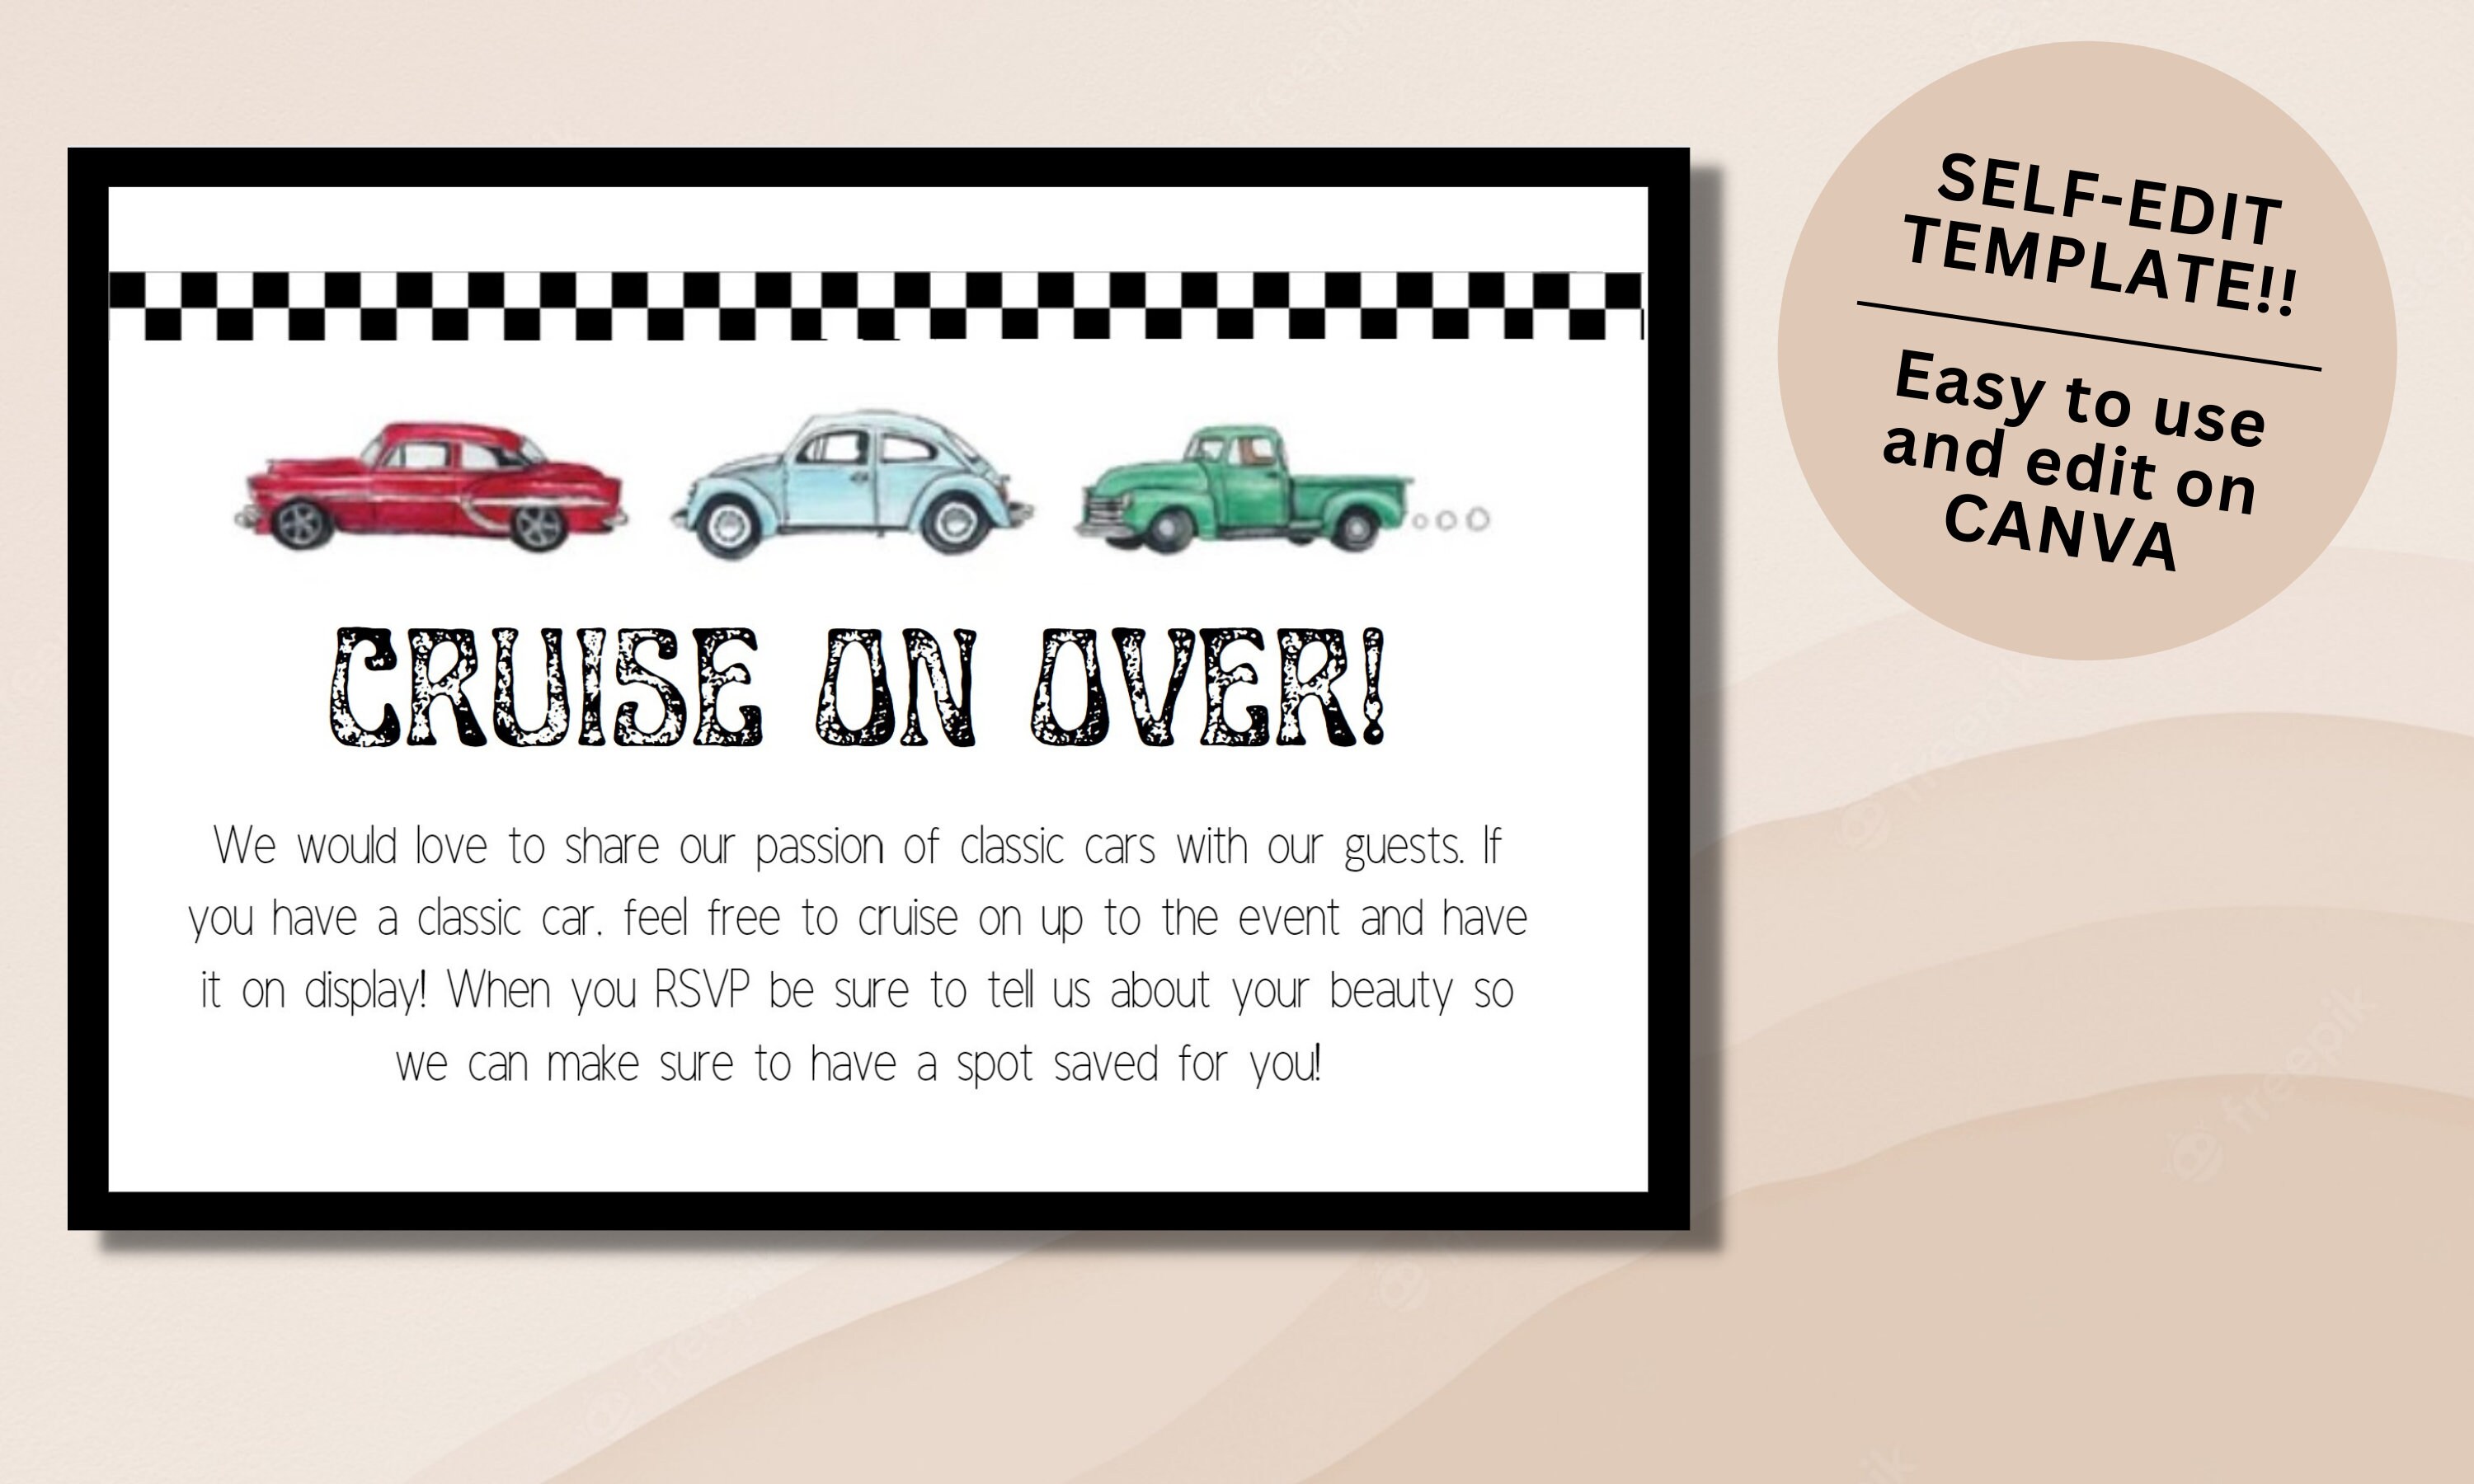 Bridal Guests at Wedding Baby Shower Engagement Car Shows Events Weddings Invite Cards Anniversary Vintage Car Invitations 20 pcs for Birthday Party Rustic 